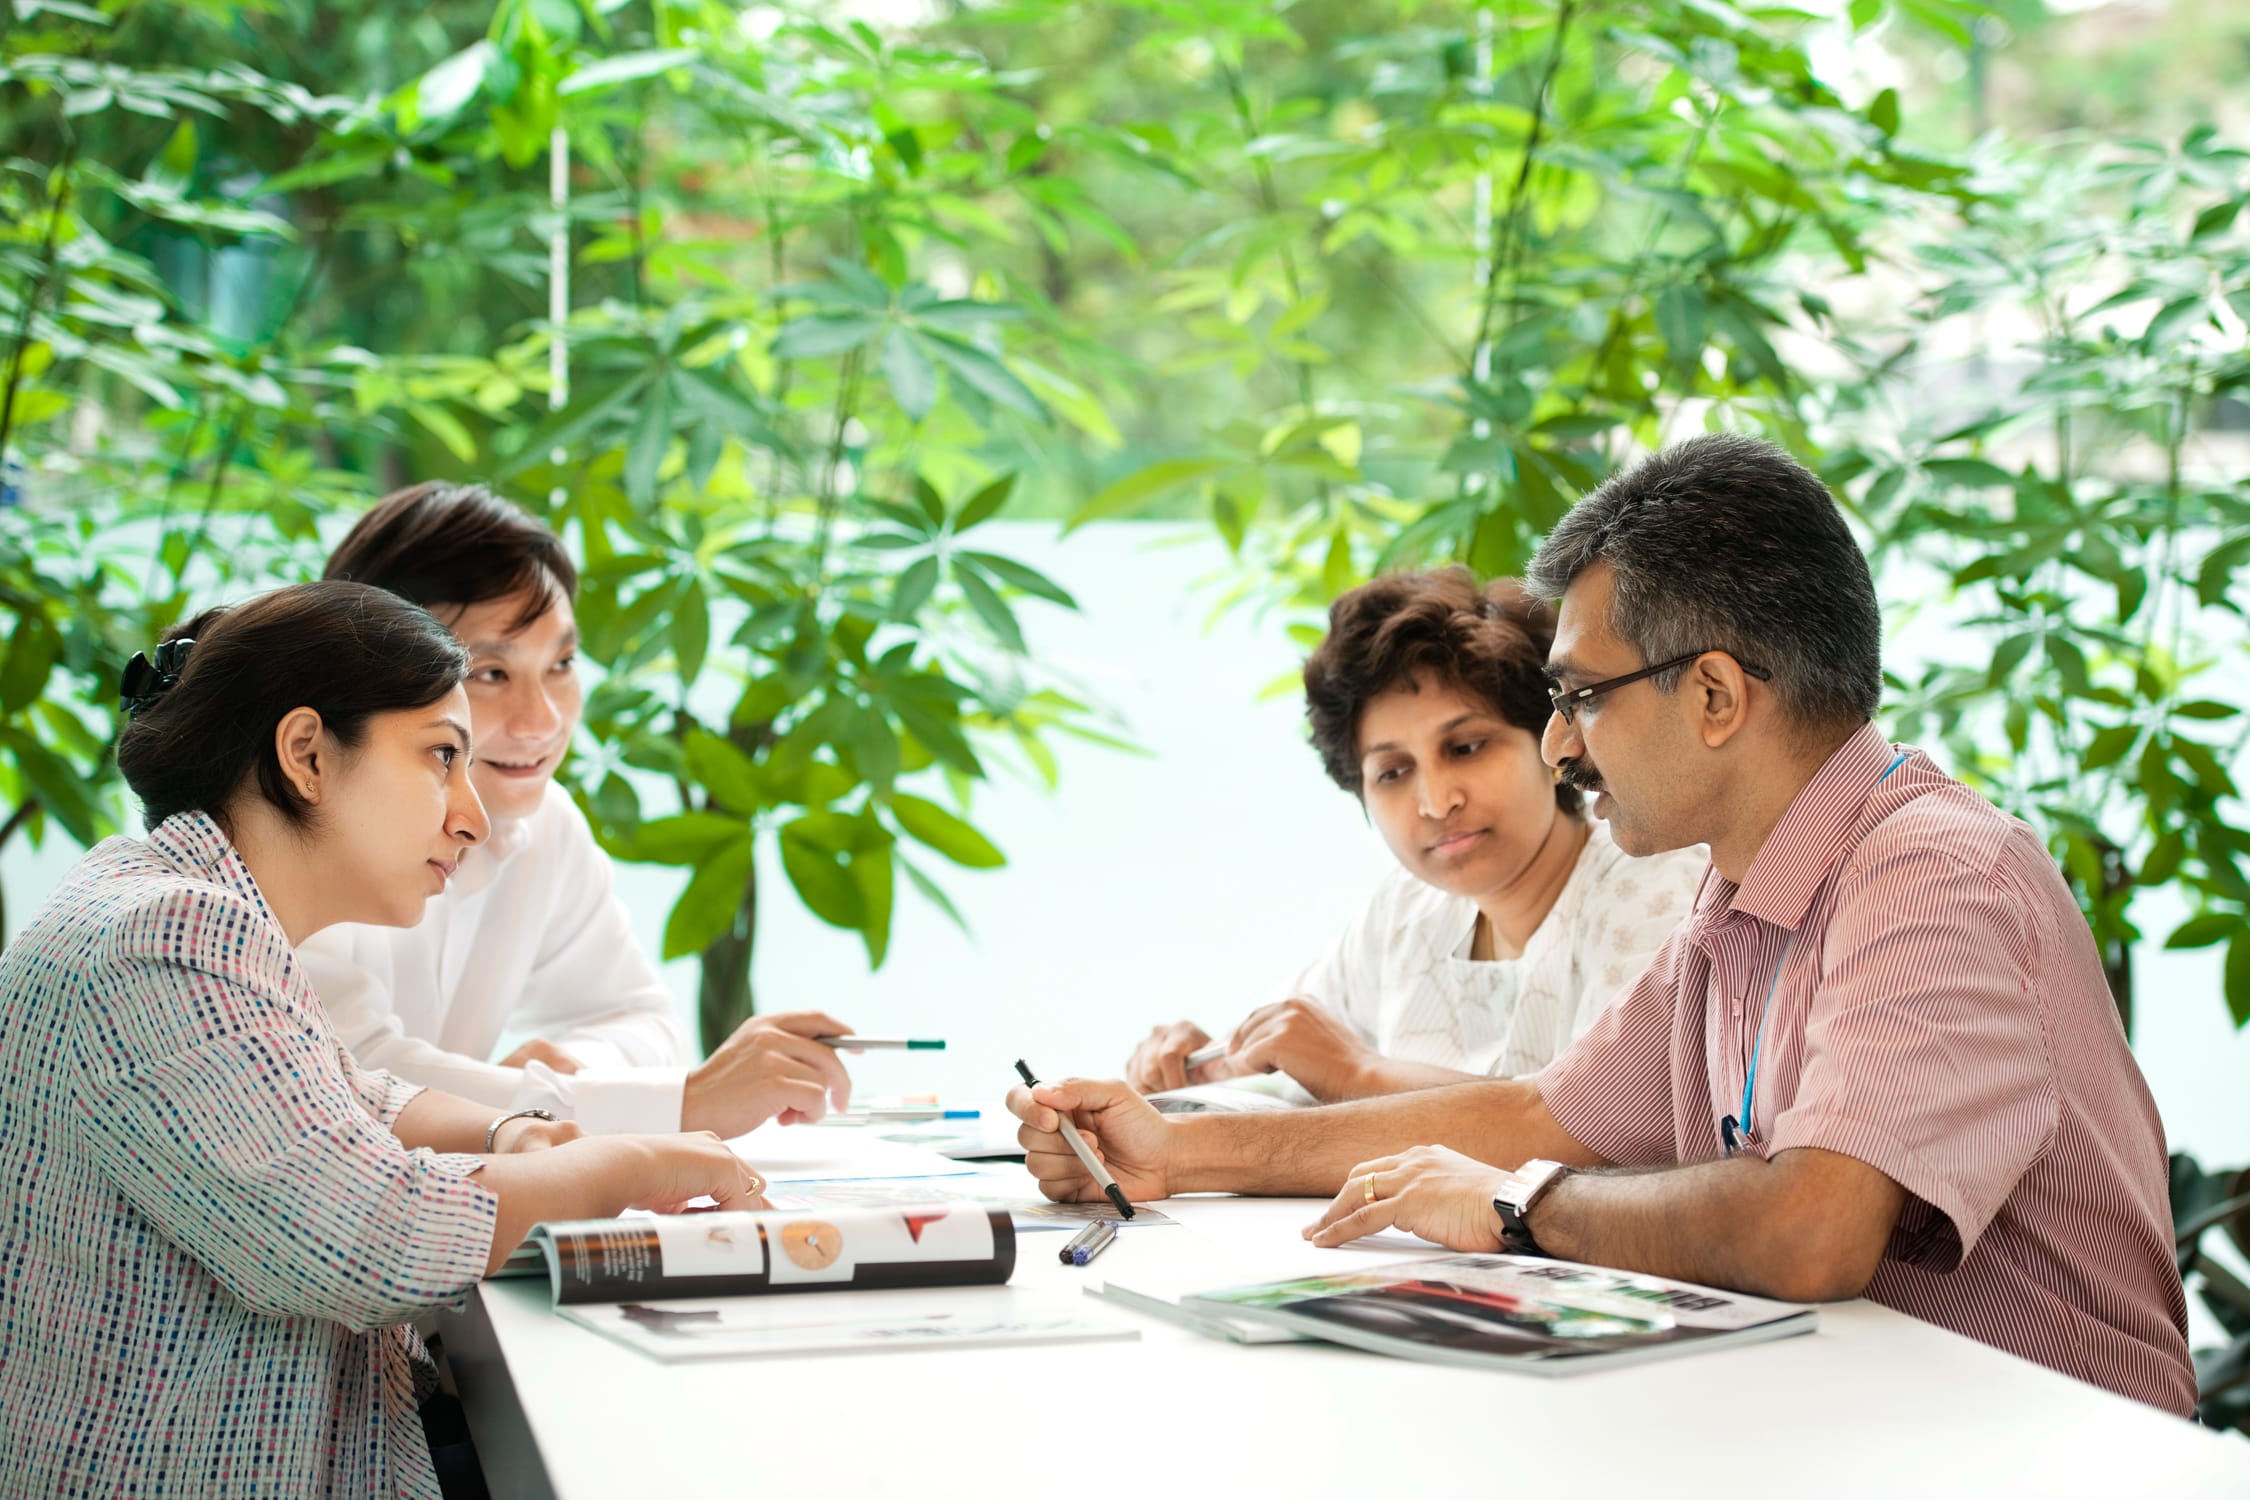 Corporate individuals and business professionals having a meeting in an office setting during a corporate photoshoot in Singapore. Credit: White Room Studio Pte Ltd